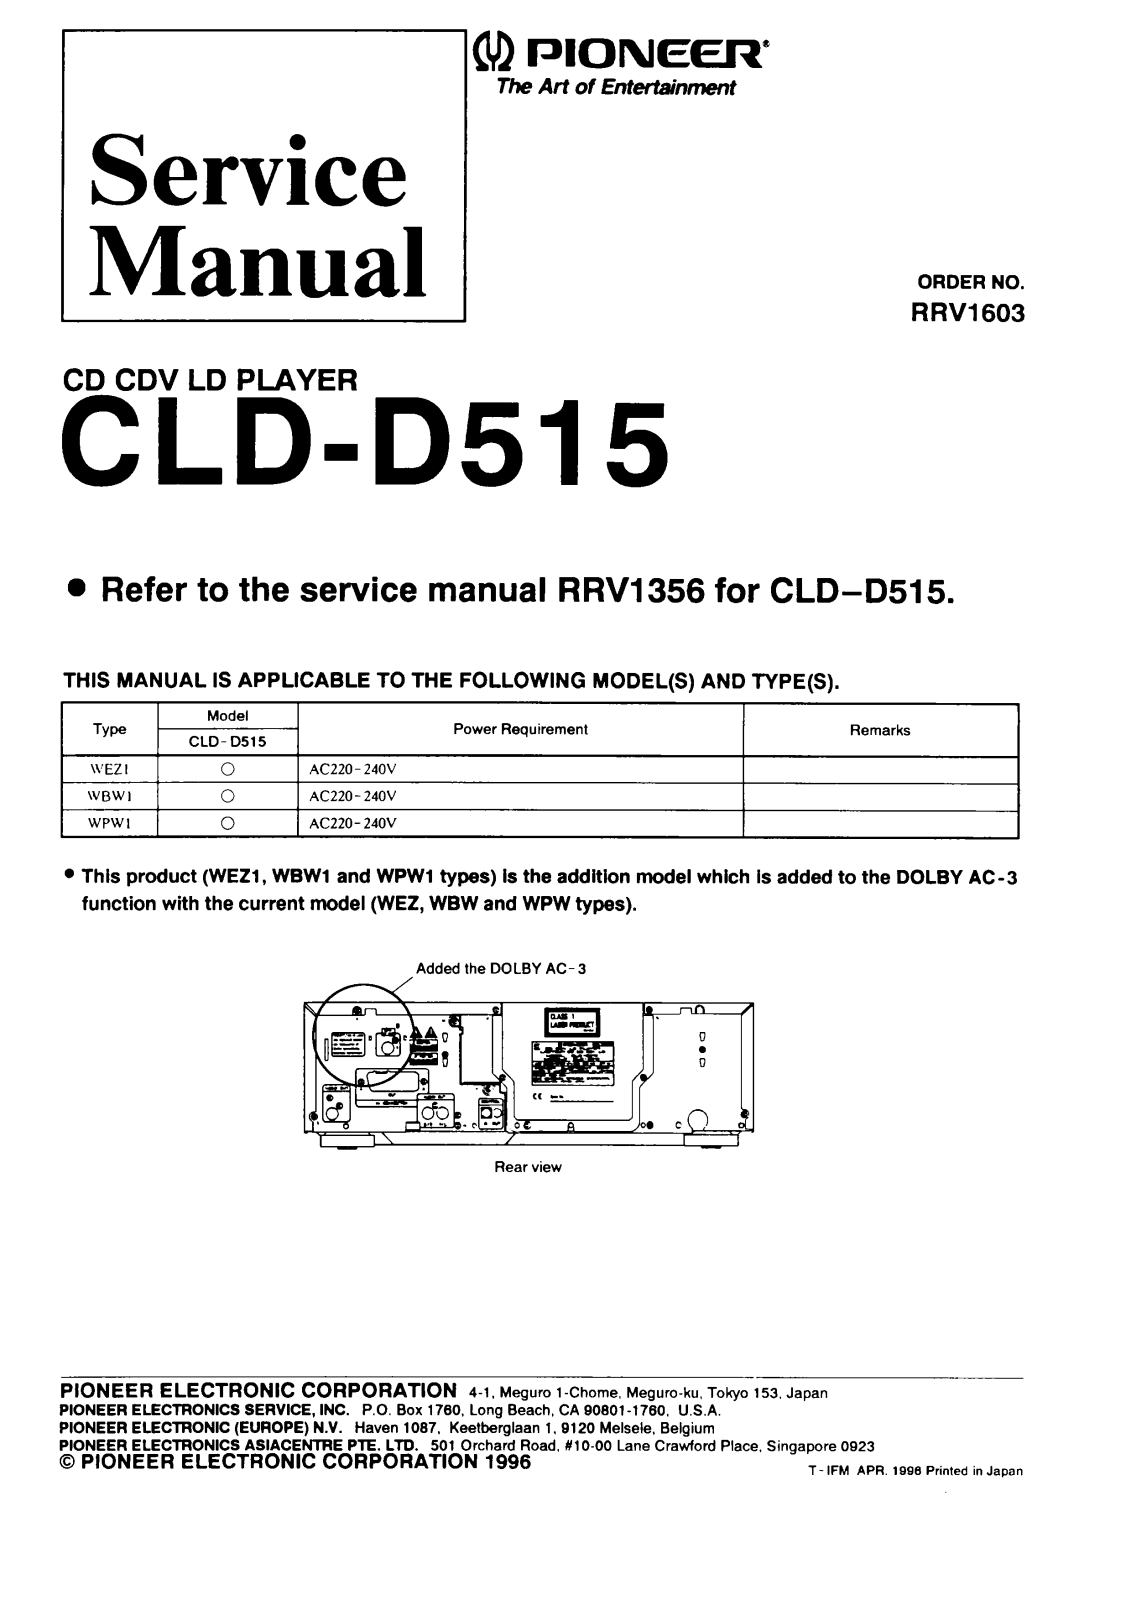 Pioneer CLD-D515 Service manual